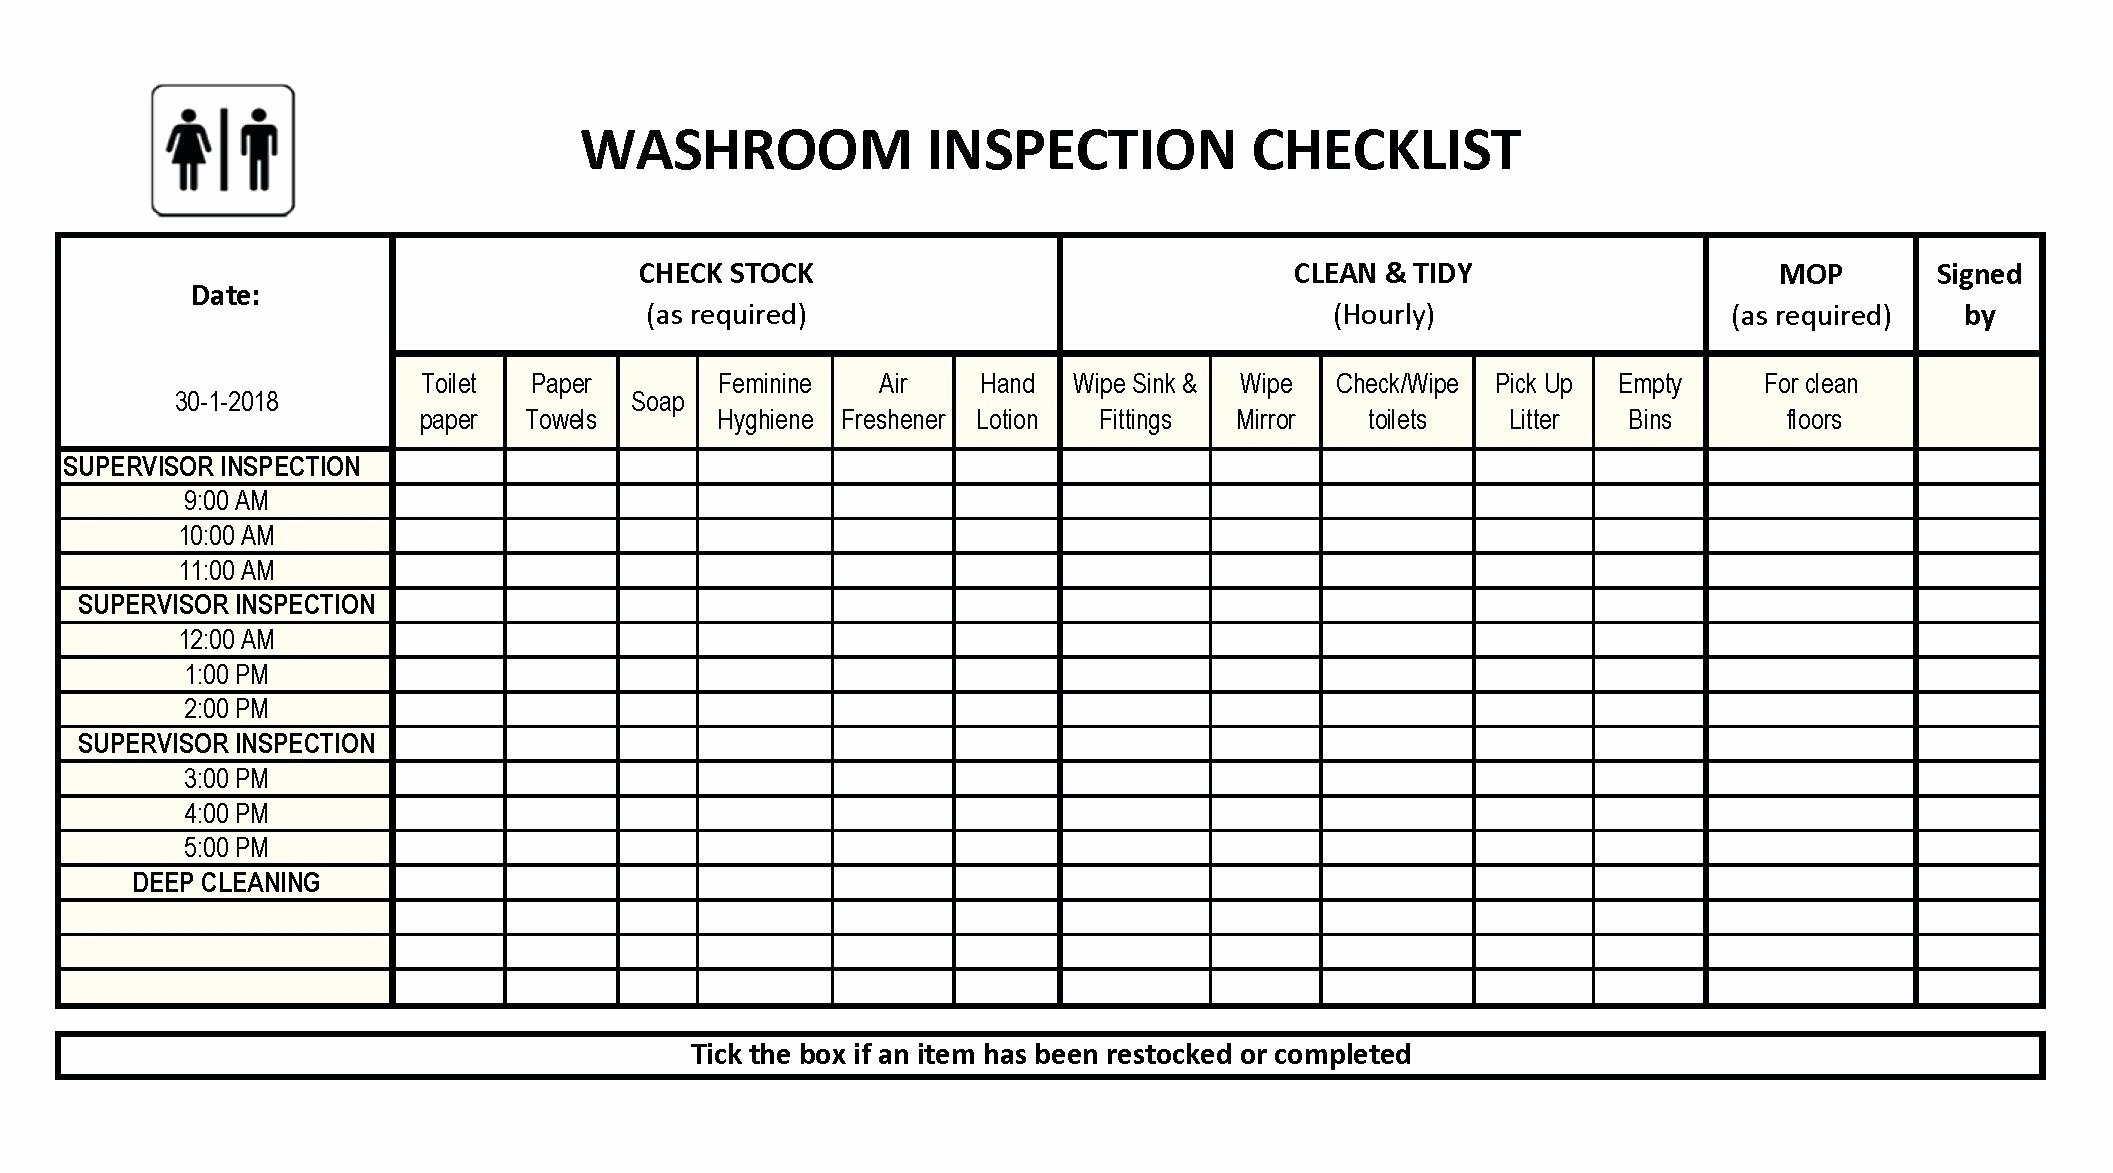 Bathroom Cleaning Checklist Template Best Of Restaurant Bathroom Cleaning Checklist Template